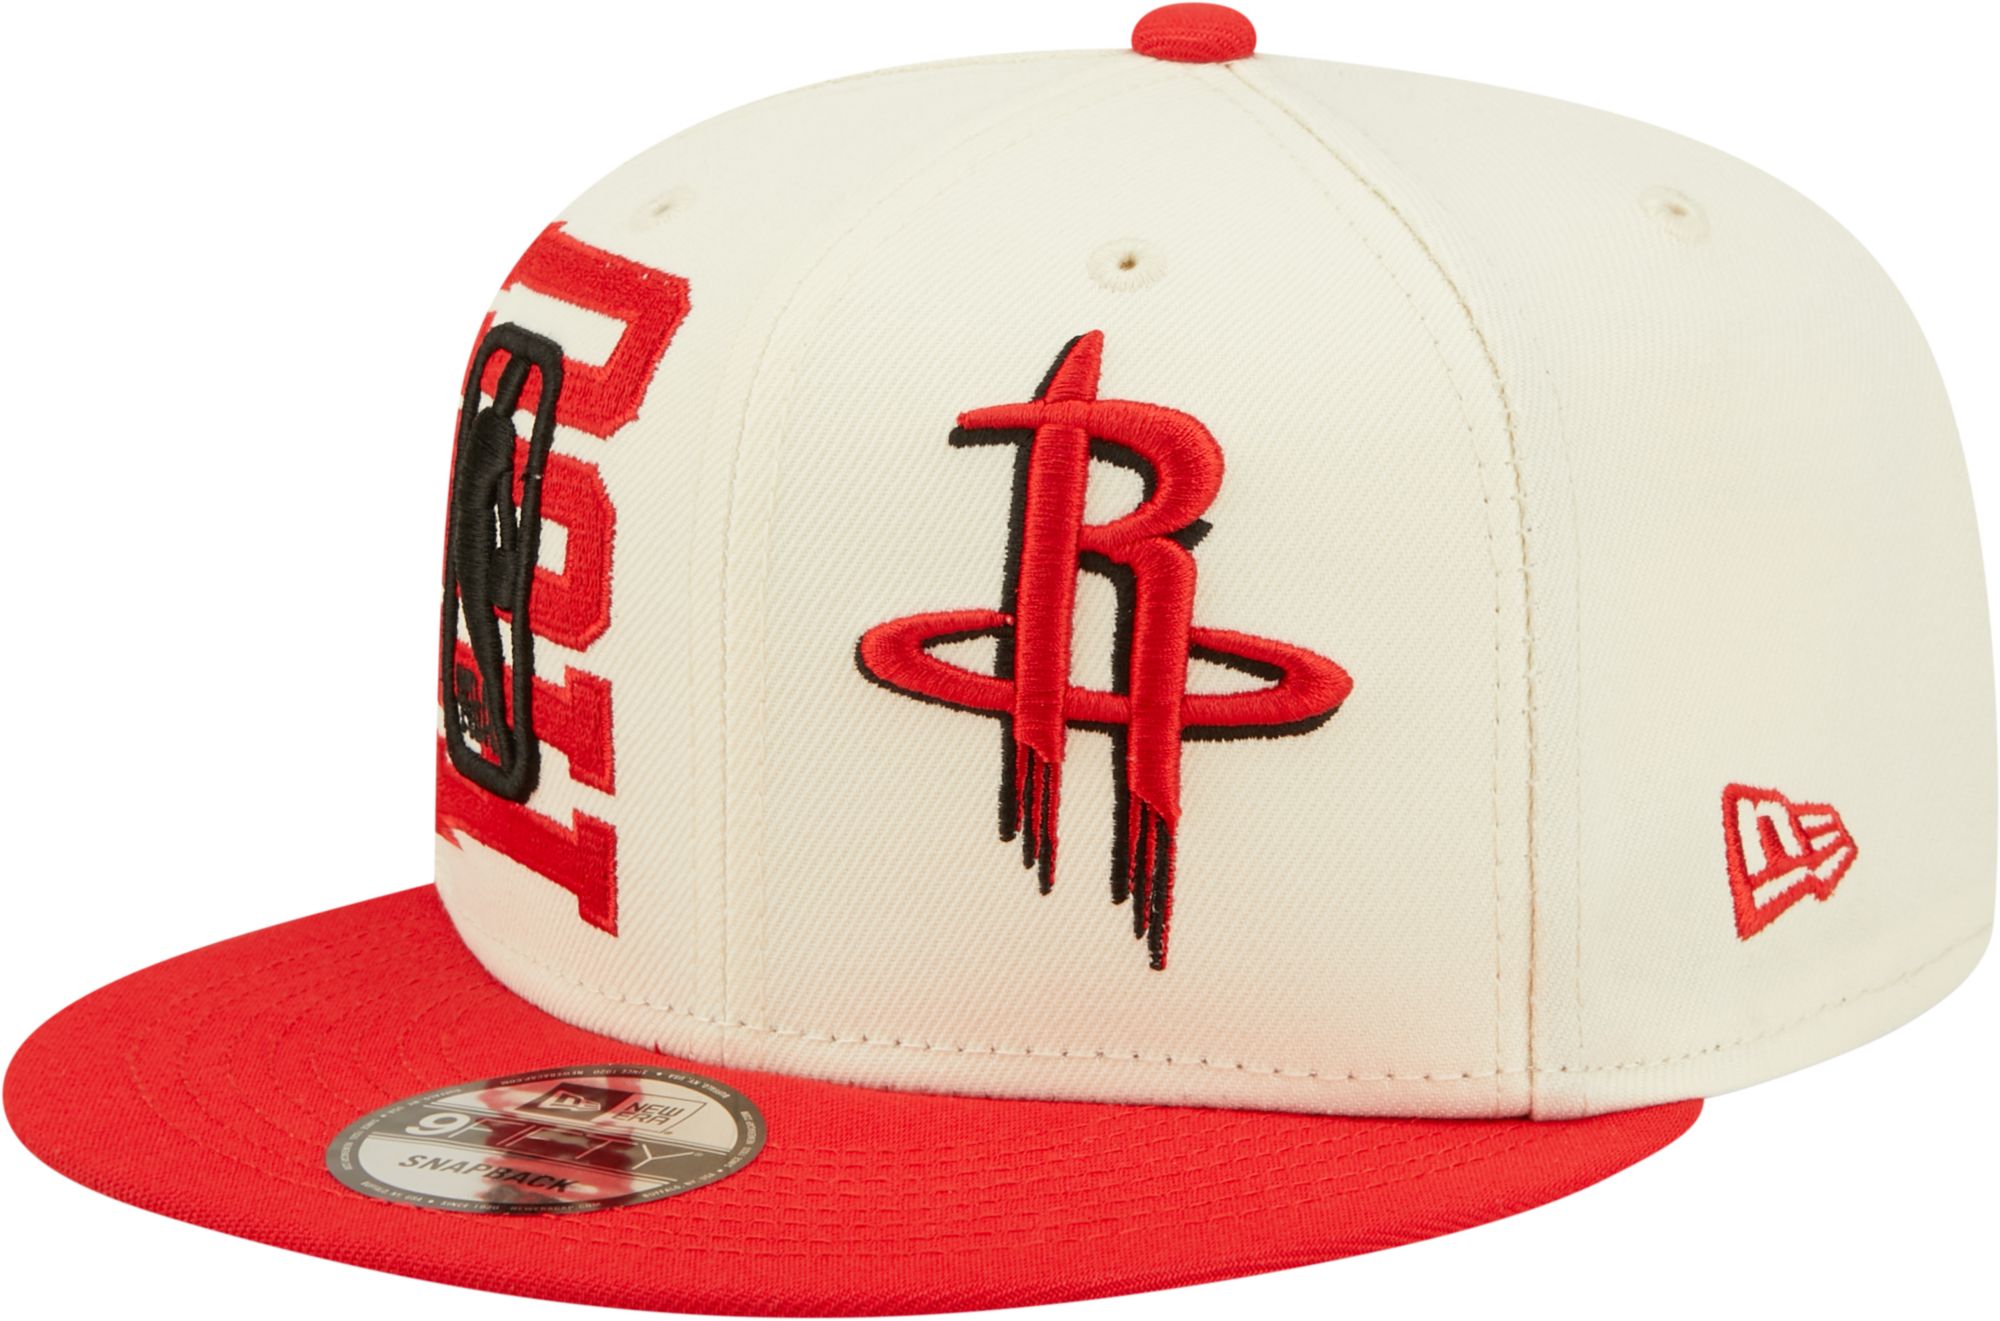  NBA The League 9Forty Adjustable Cap : Sports & Outdoors